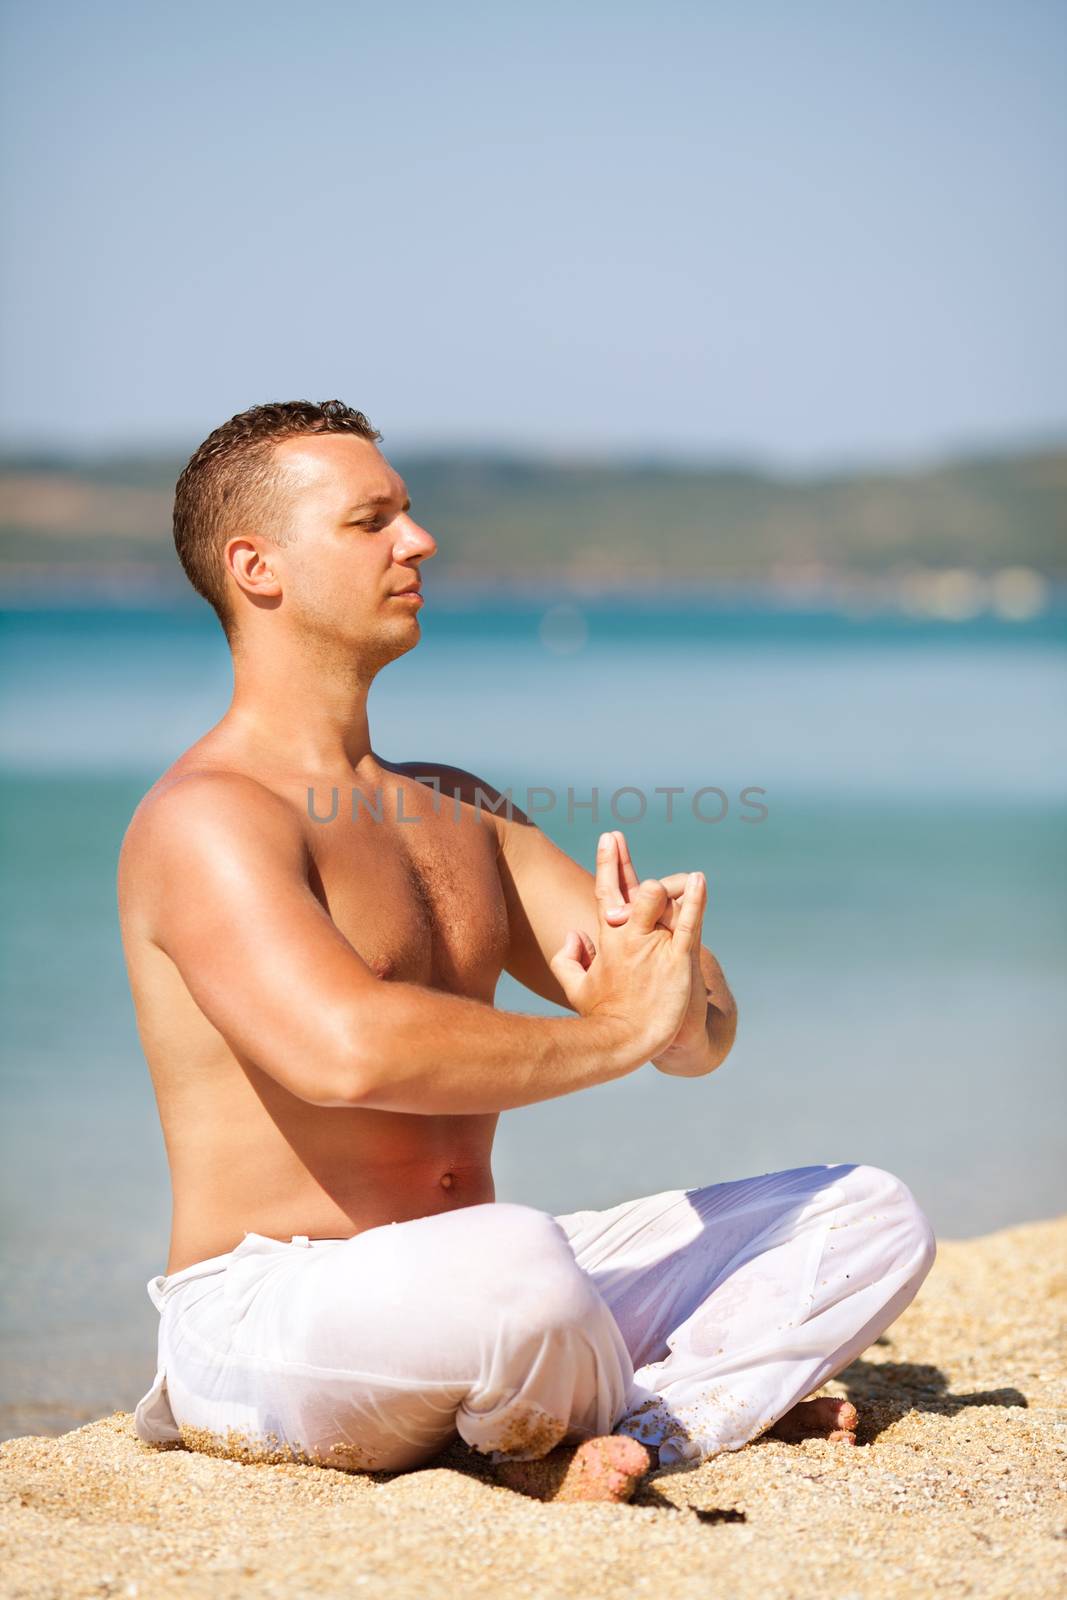 Meditation on the beach by MilanMarkovic78